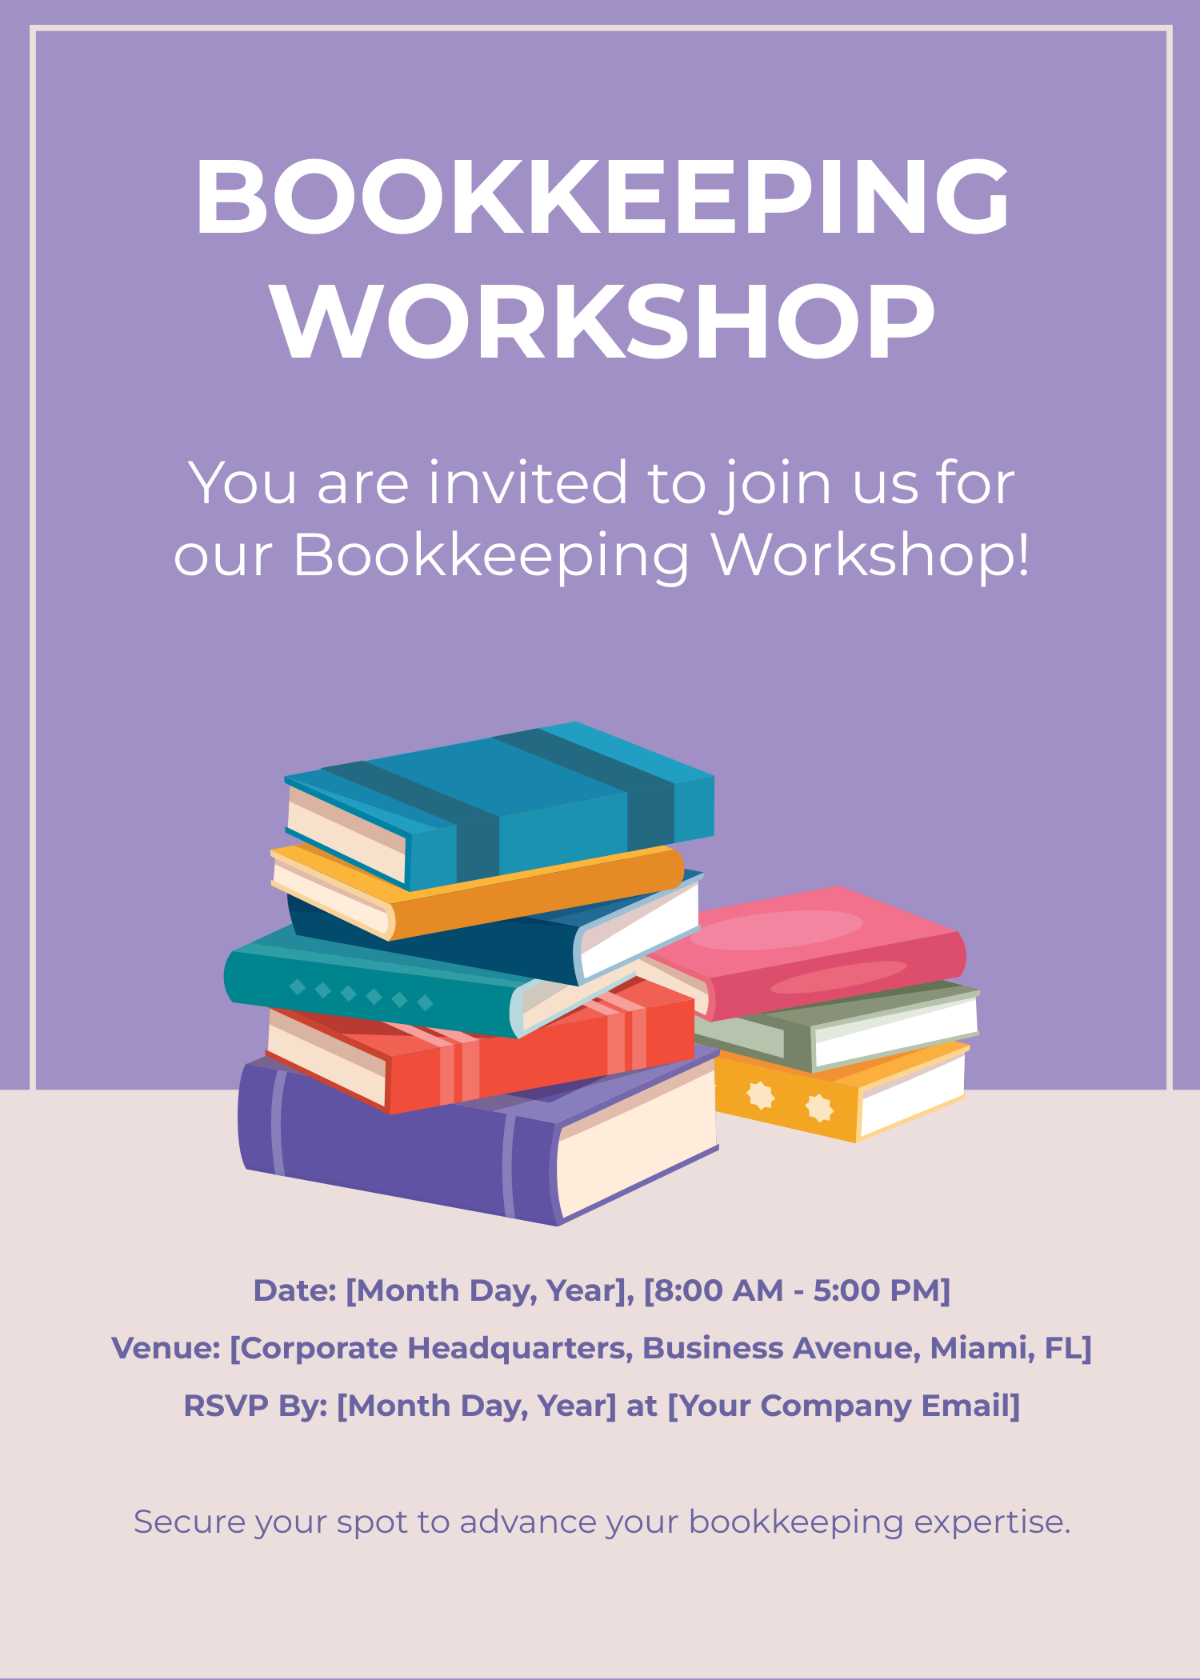 Bookkeeping Workshop Participant Invitation Card Template